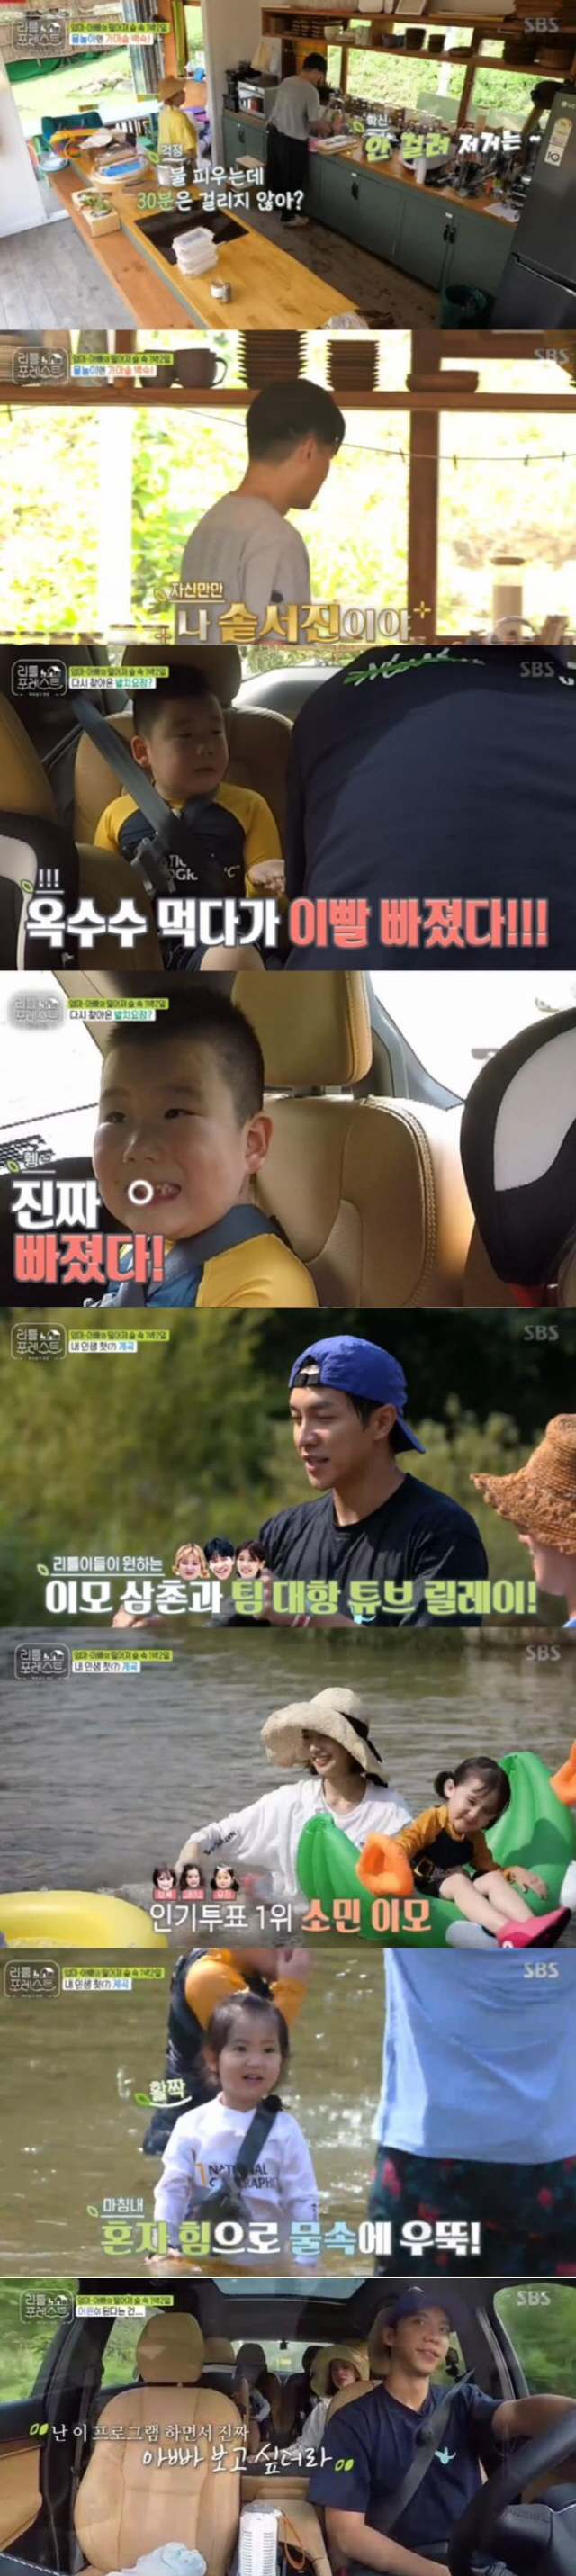 In SBS Wolhwa Entertainment Little Forest, members and Littles valley water play were drawn and attracted attention.Little Forest Lee Seo-jin and Park Na-rae, who were broadcast on the 3rd, were ready for the summer specials for Little, and Lee Seo-jin decided to groom the chicken on behalf of Park Na-rae, who has chicken phobia.However, Lee Seo-jin was increasingly manipulated into a Park Na-rae cooking bot and laughed.In the meantime, Lee Seo-jin, Colserjin, said, I am a specialist in firewood. However, he suffered unexpected sufferings by burning unexpected heat waves.In addition, Lee Han-yi once again suffered a tooth-sucking accident. Lee felt this shaking in the garden, and Lee Seung-gi said, Lets pick it with corn hair.It is the first time in our country, he persuaded, but it did not work.In the end, Lee fell out of his teeth while eating boiled corn in the car, and gave Lee Seung-gi and Lee Seo-jin a big smile.Littles later enjoyed full-scale valley water play, but Eugene felt afraid of water play, and eventually fell into the water while trying to ride a frog tube.At that moment, Jung So-min reached out to hold Eugenei and Eugenei did not cry.Jung So-min said, I told him that I should not be embarrassed, so I said, Its okay. I talked to him casually.Meanwhile, popular votes among members were also held.Lee Han-yi and Jung Heon-yi selected Lee Seung-gi, Brooke and Grace, and Eugene Lee Jung So-min, and Park Na-rae won an unexpected Little boys and members went back to the car after a water play.Lee Seung-gi, who watched the children sleep in the car, said, My appearance is what I have seen from our Father. I want to see Father while Little Forest.Littles, as well as the members, had a grown day, with the scene recording a top-rated 6.3% per minute, taking the best minute.On the other hand, the broadcast was 4.3% in the first part of the average audience rating and 5.1% in the second part (based on Nielsen Korea and the metropolitan area).